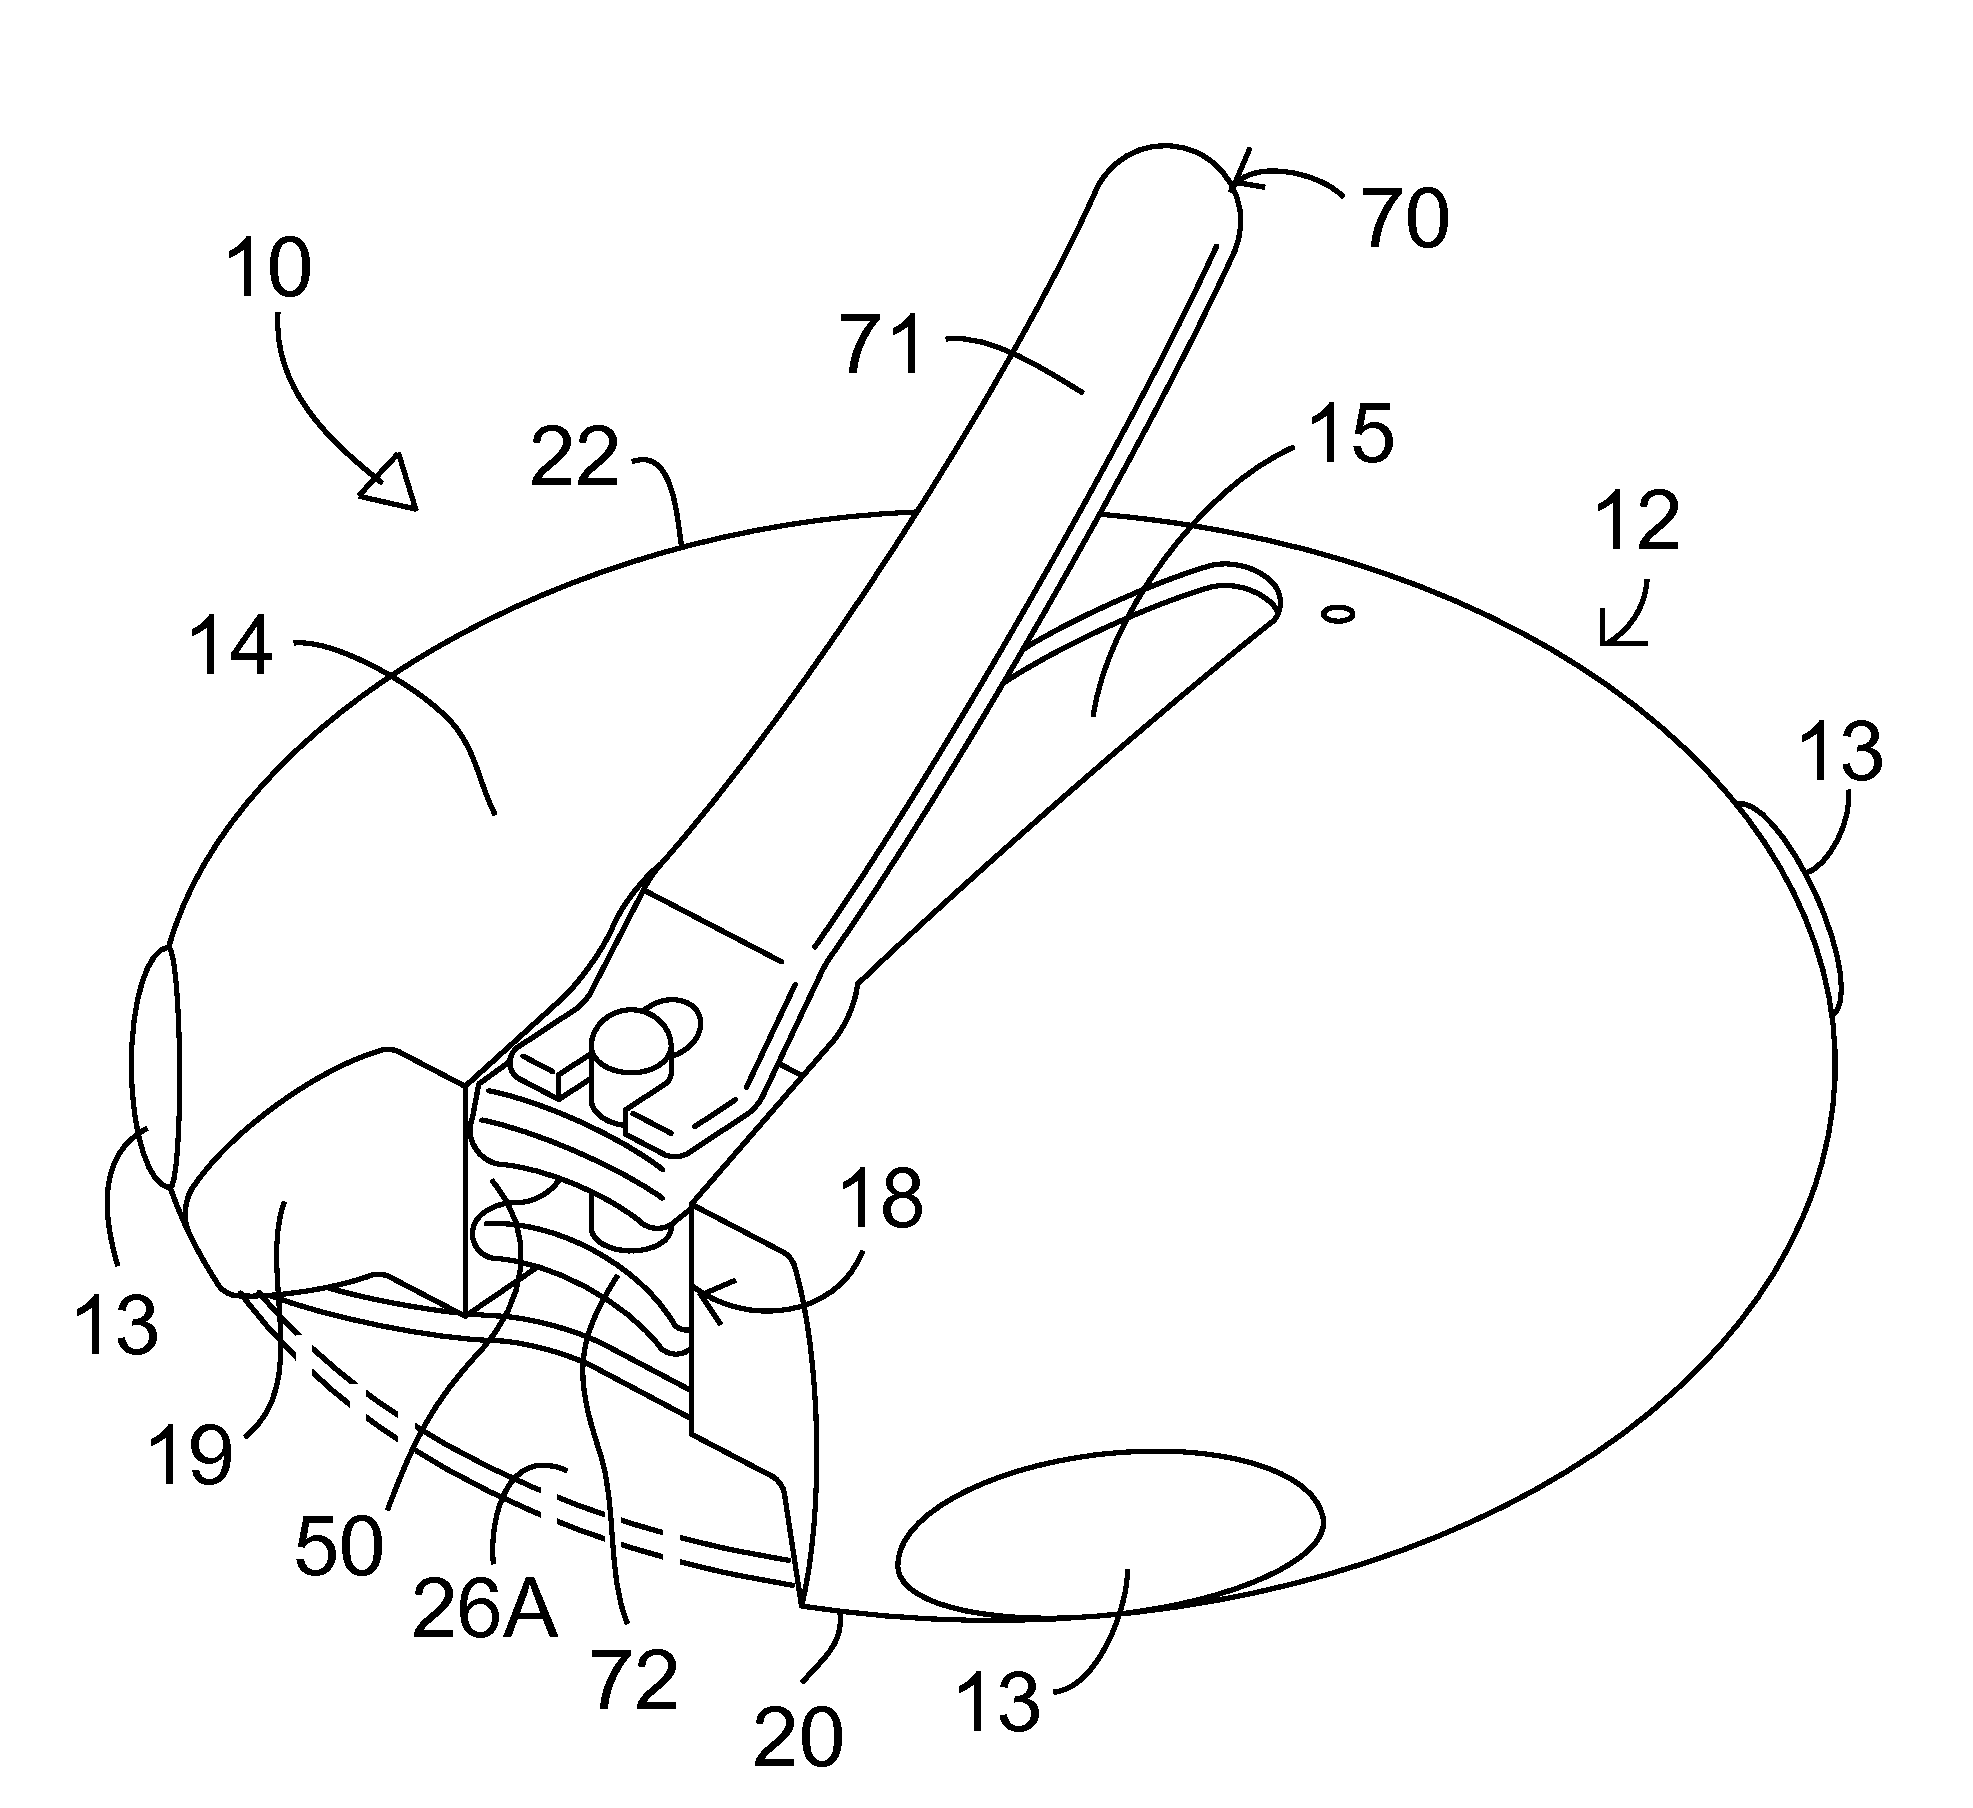 Nail clipper holding device